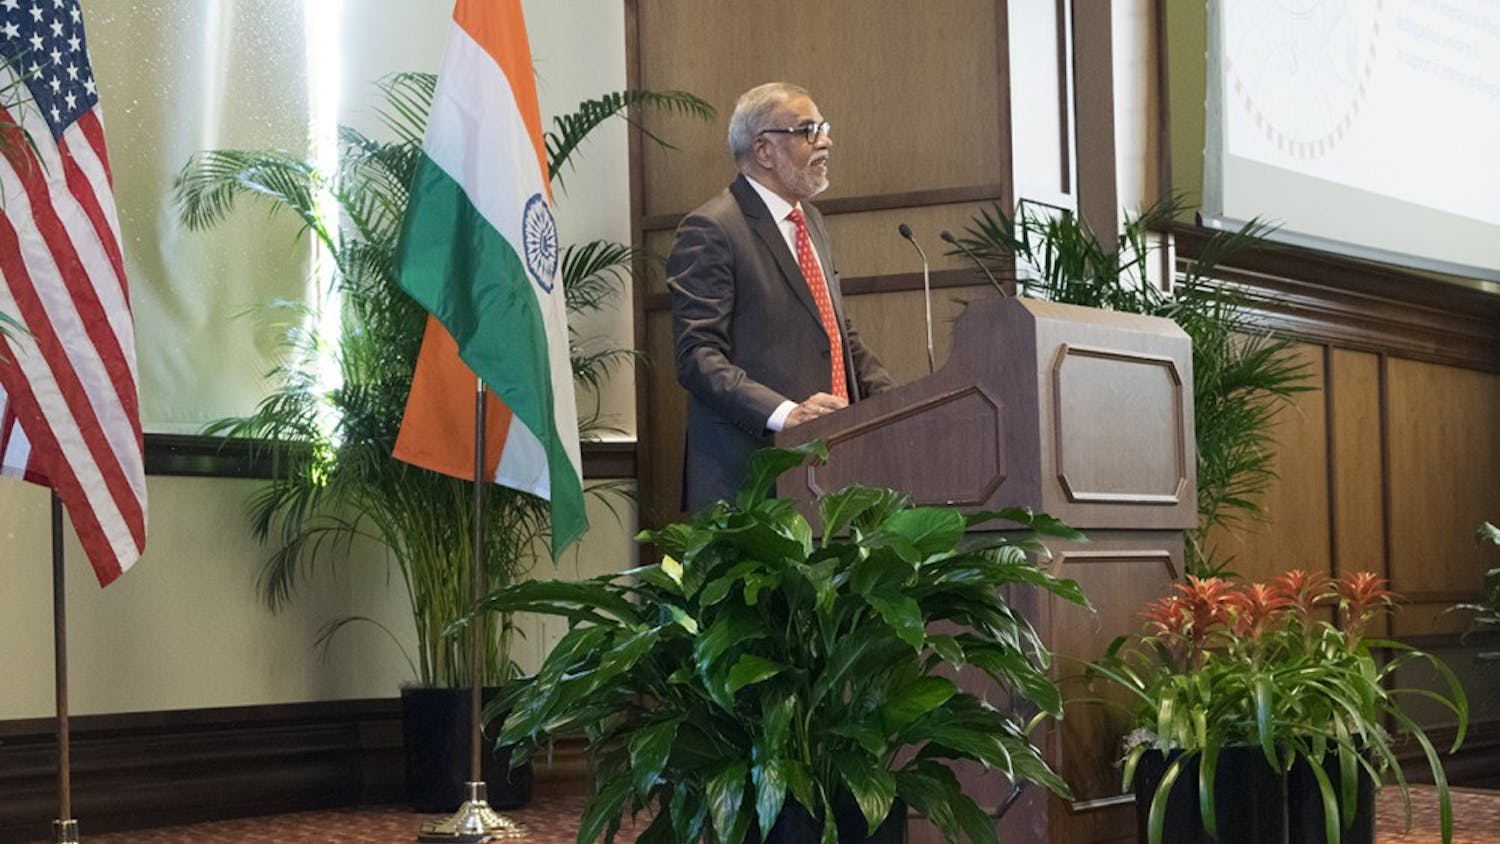 Dr. Narendra Jadhav speaks in Franklin Hall Monday afternoon as part of the 6th Annual Patrick O’Meara International Lecture. Jadhav, who is a member of Rajya Sabha, the upper house of the Indian Parliament, spoke on the topics of caste, race and economic growth. 